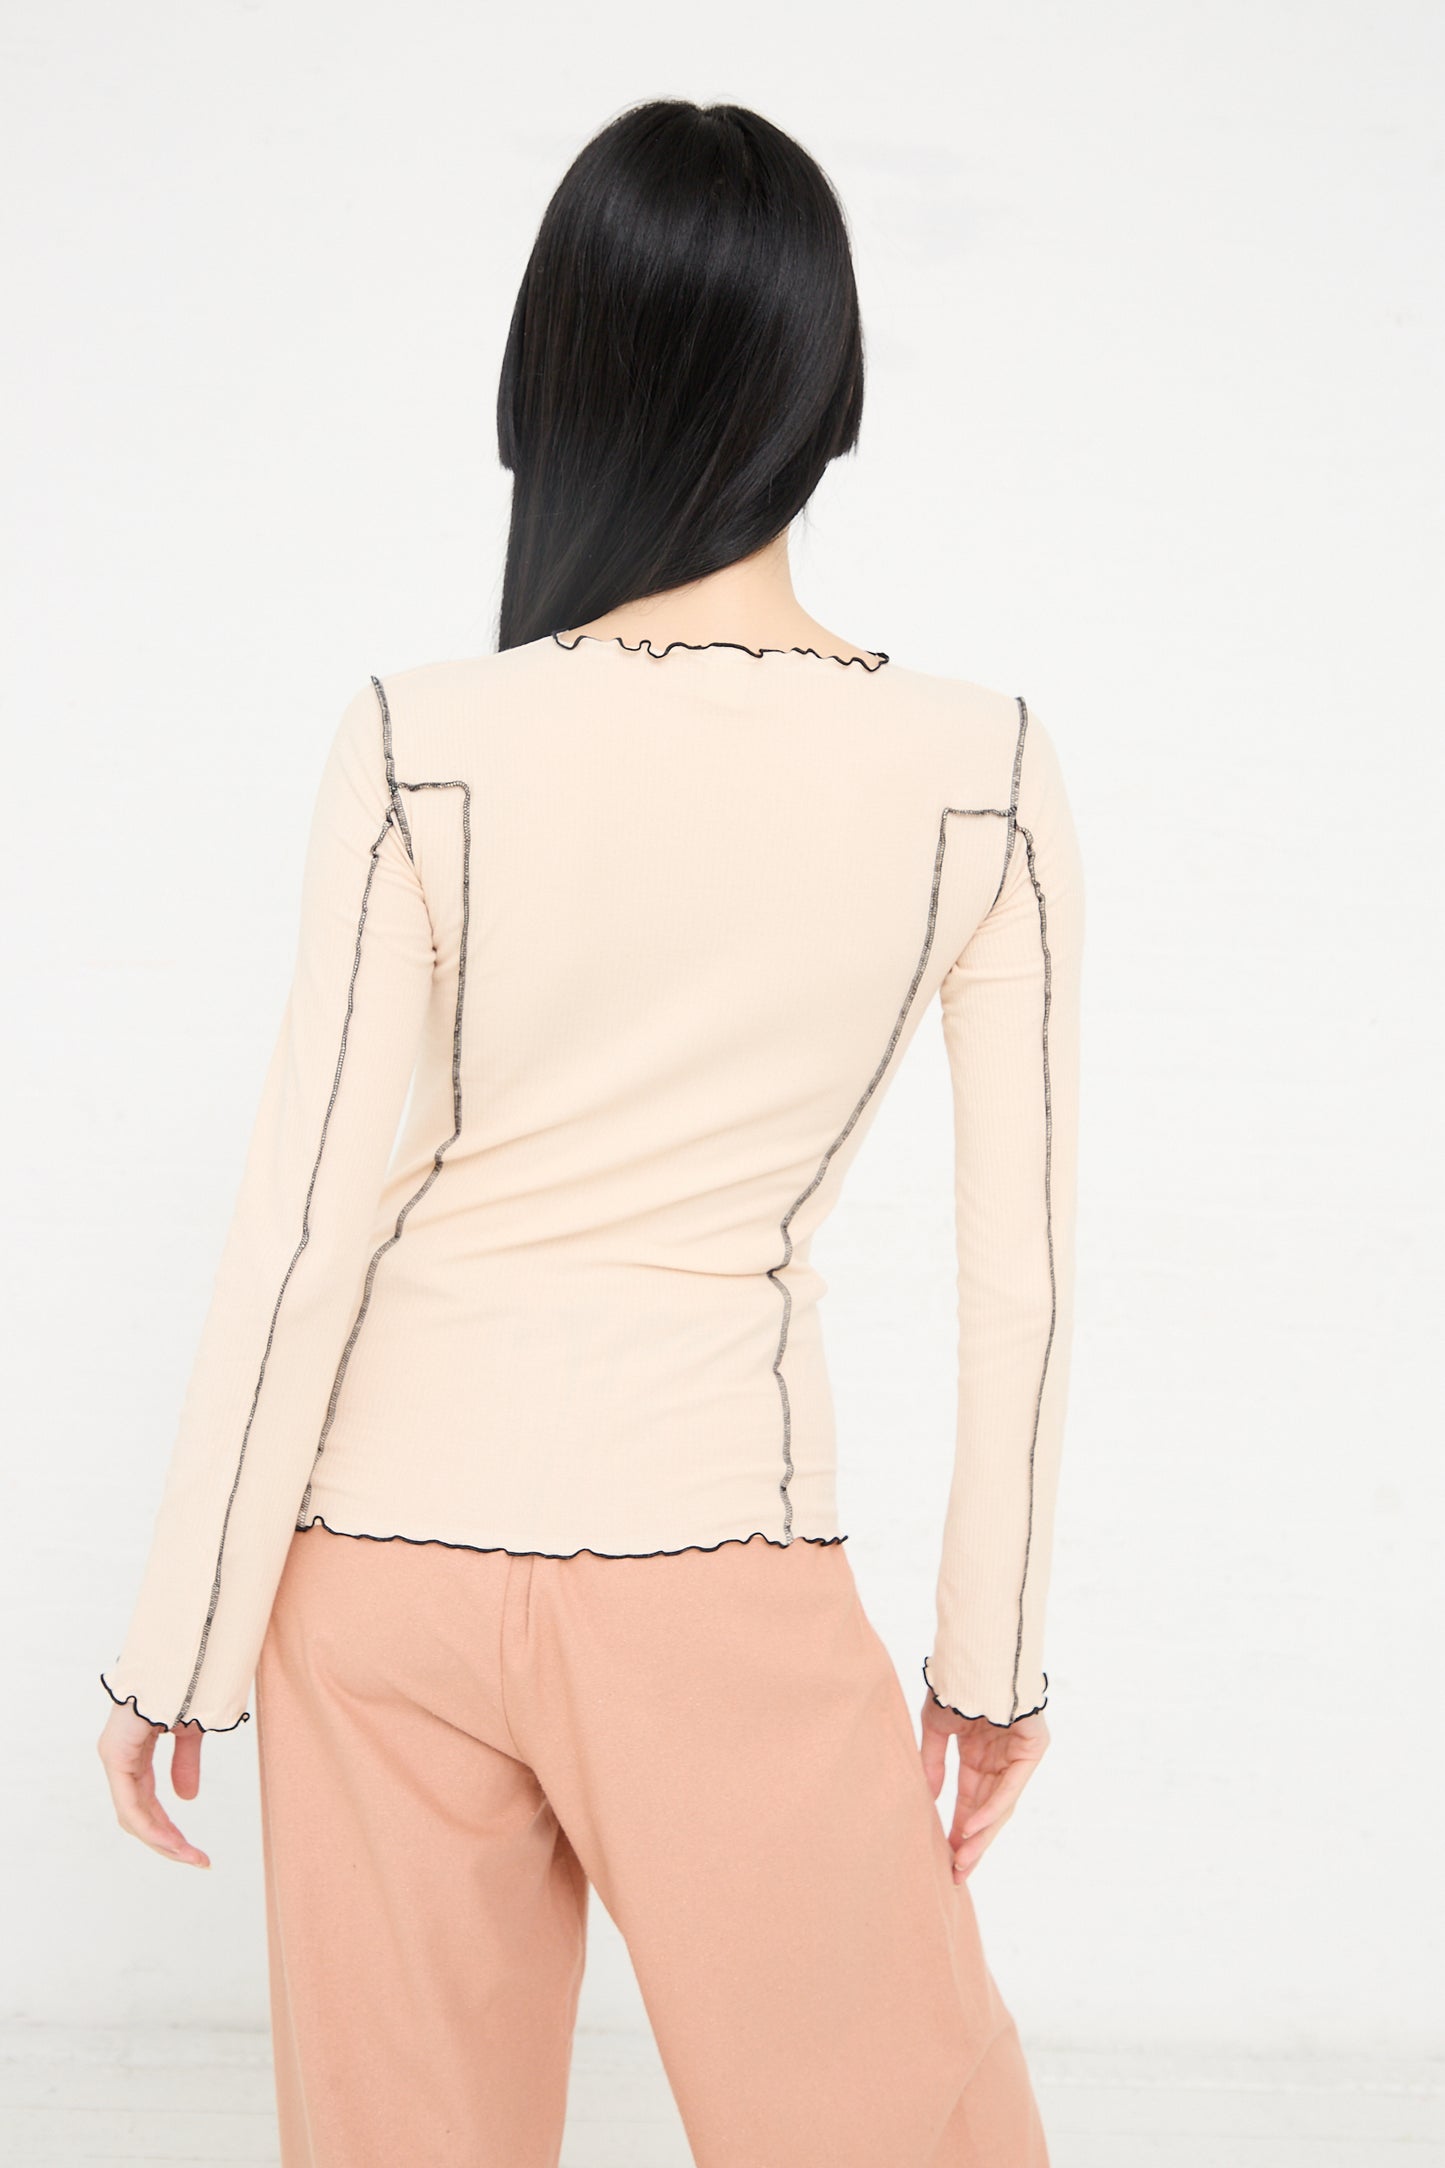 Woman with long black hair, seen from behind, wearing a beige boatneck top with black stitched details and peach pants against a white background - Organic Cotton Rib Omato Long Sleeve in Kano Pink by Baserange.